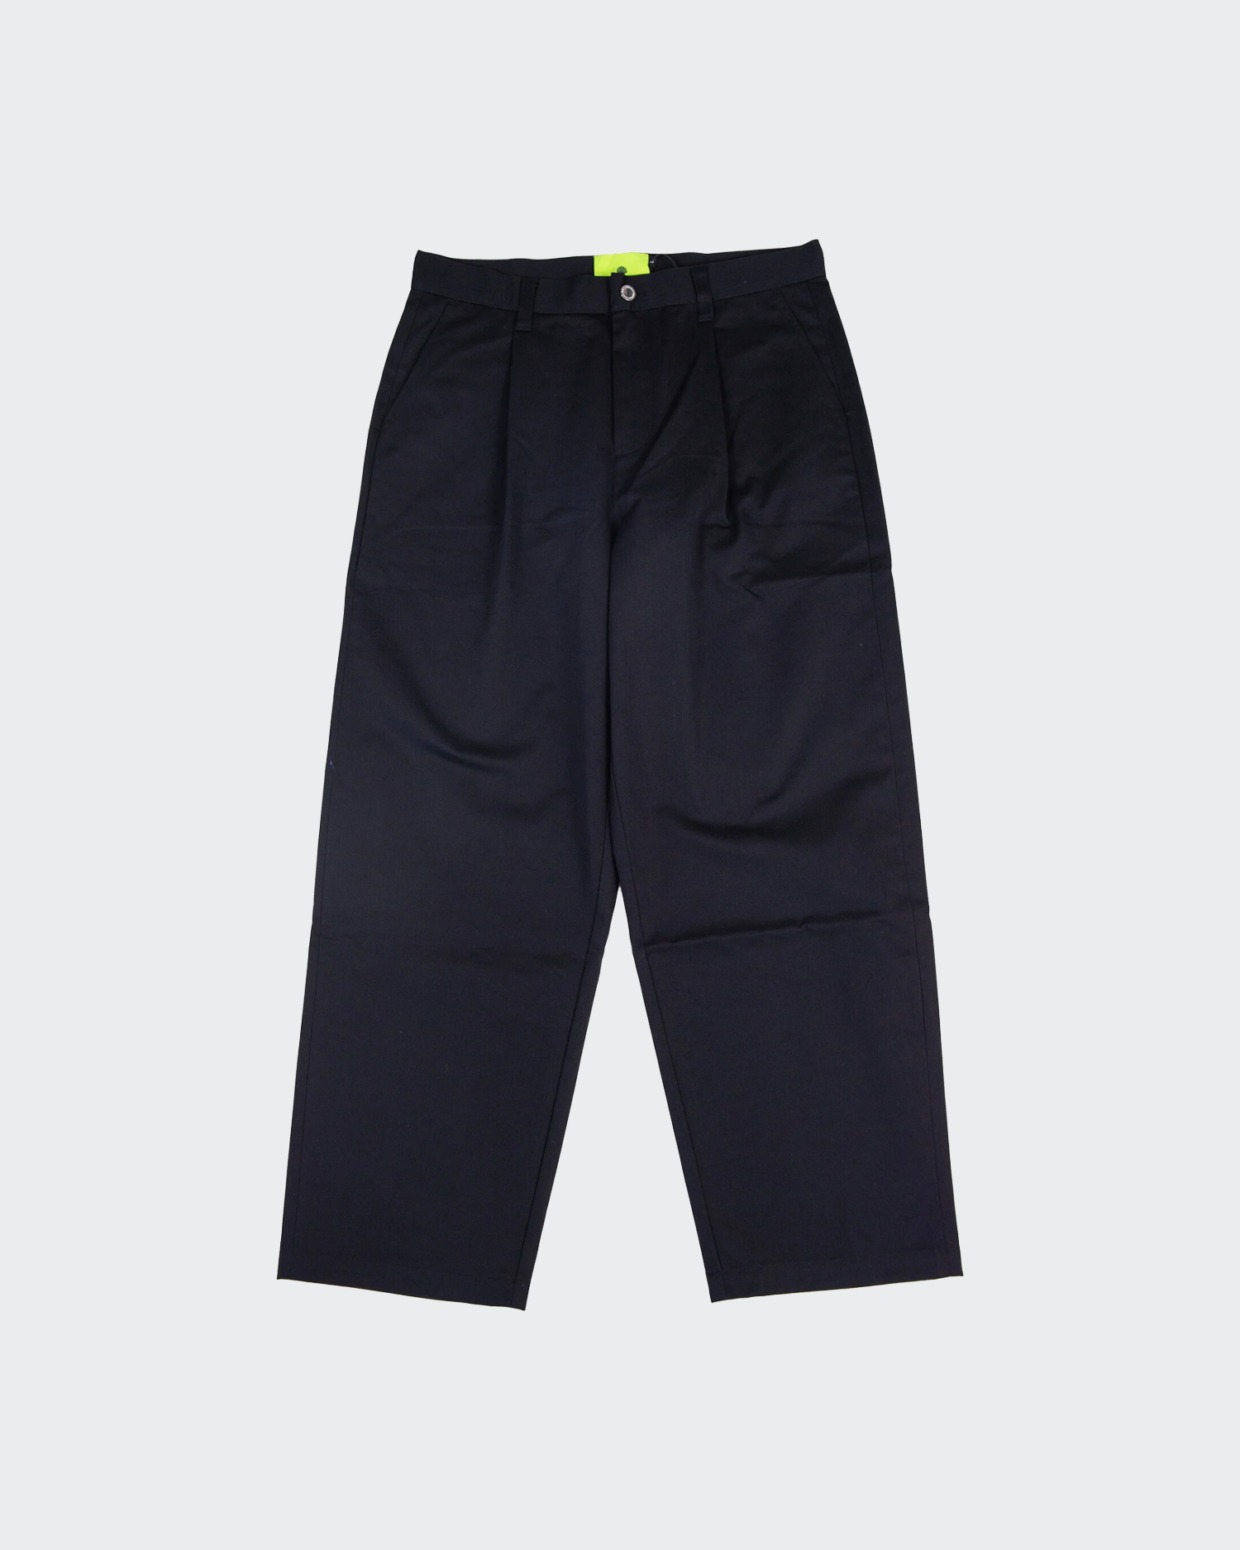 New Amsterdam Surf Association Reworked Trousers